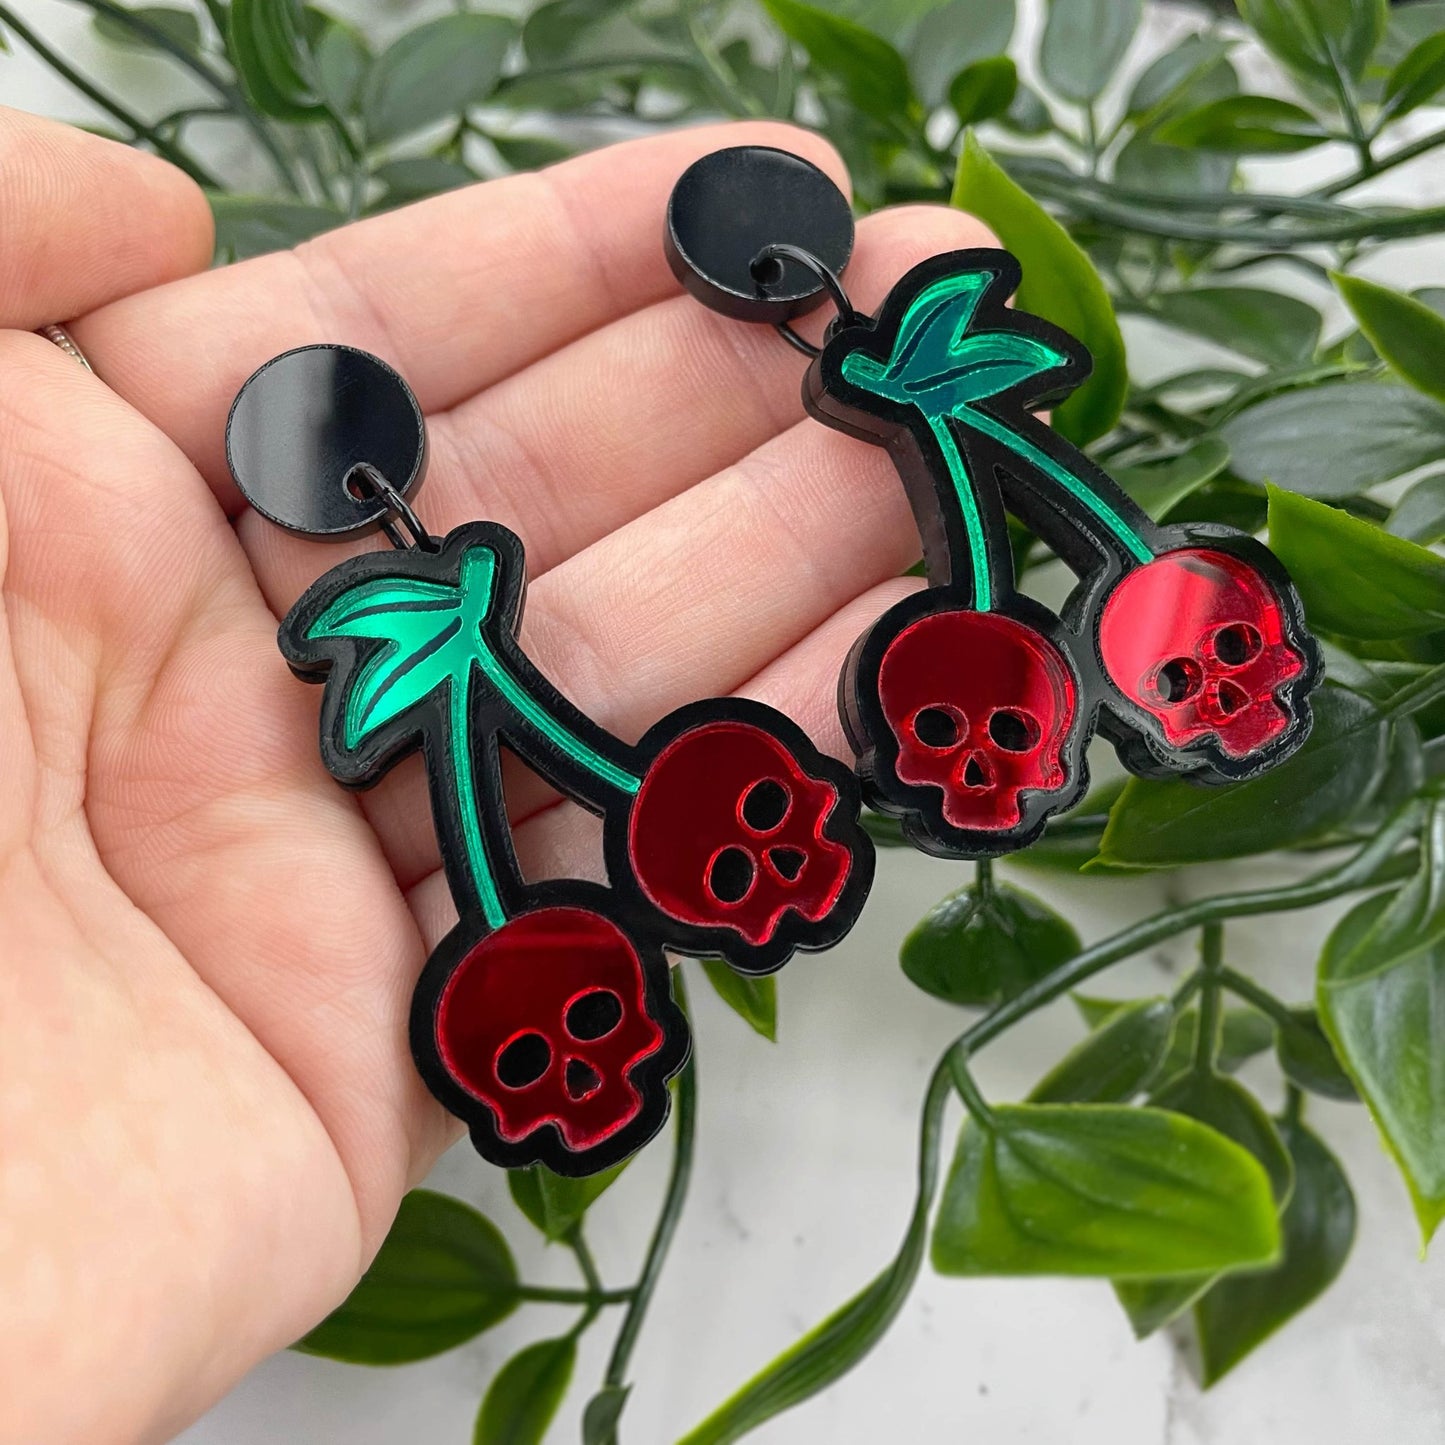 Spooky Cherry Earrings - Lost Minds Clothing